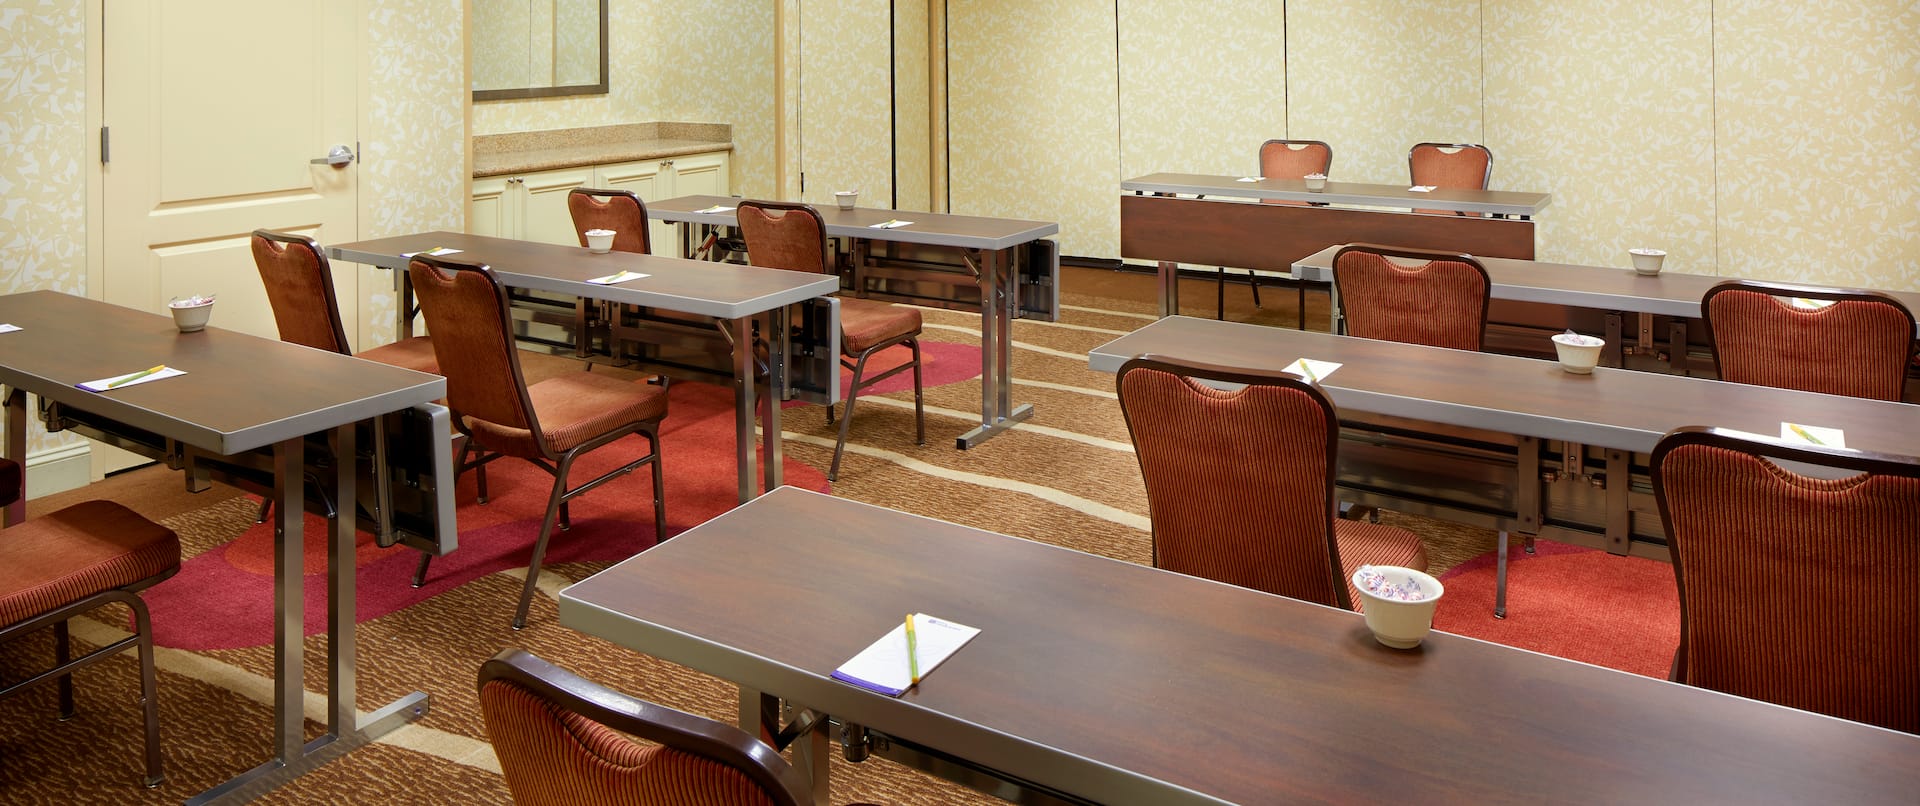 Classroom Setup in Meeting Room With Tables and Chairs Facing Speaker's Table and Two Chairs